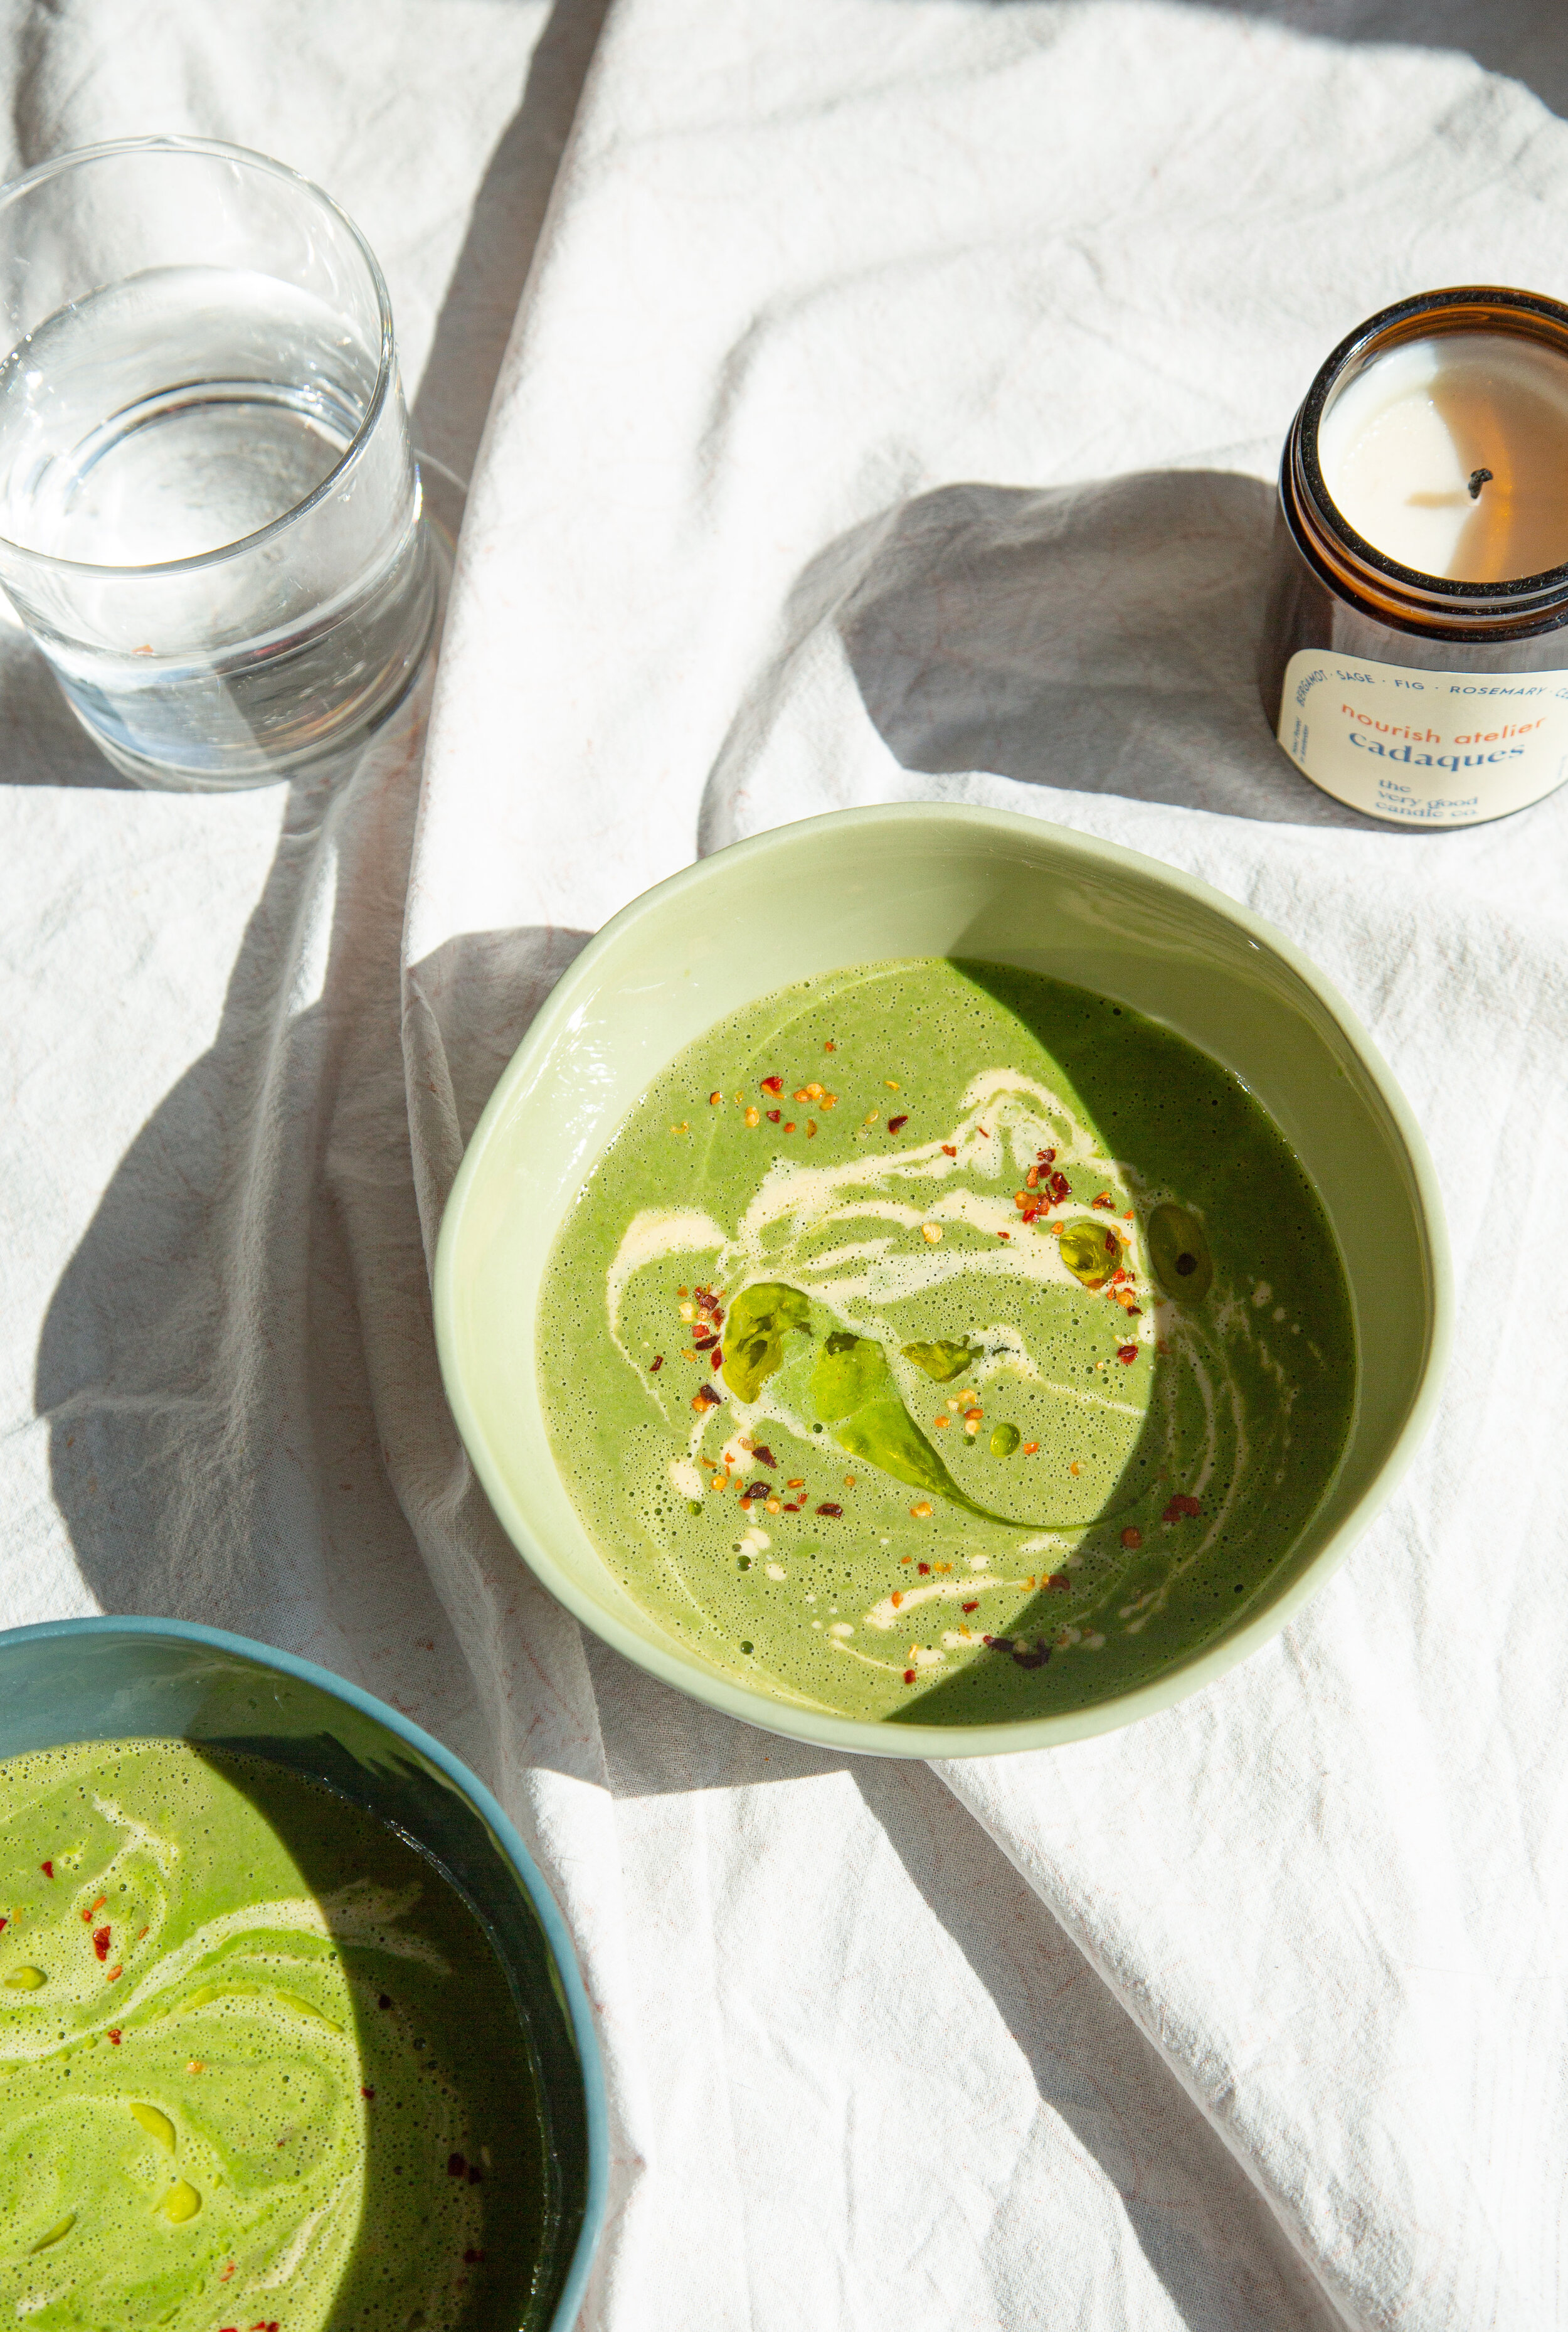 Atelier ginger Green toasted soup with — almond. The and vegan pea perfect Nourish